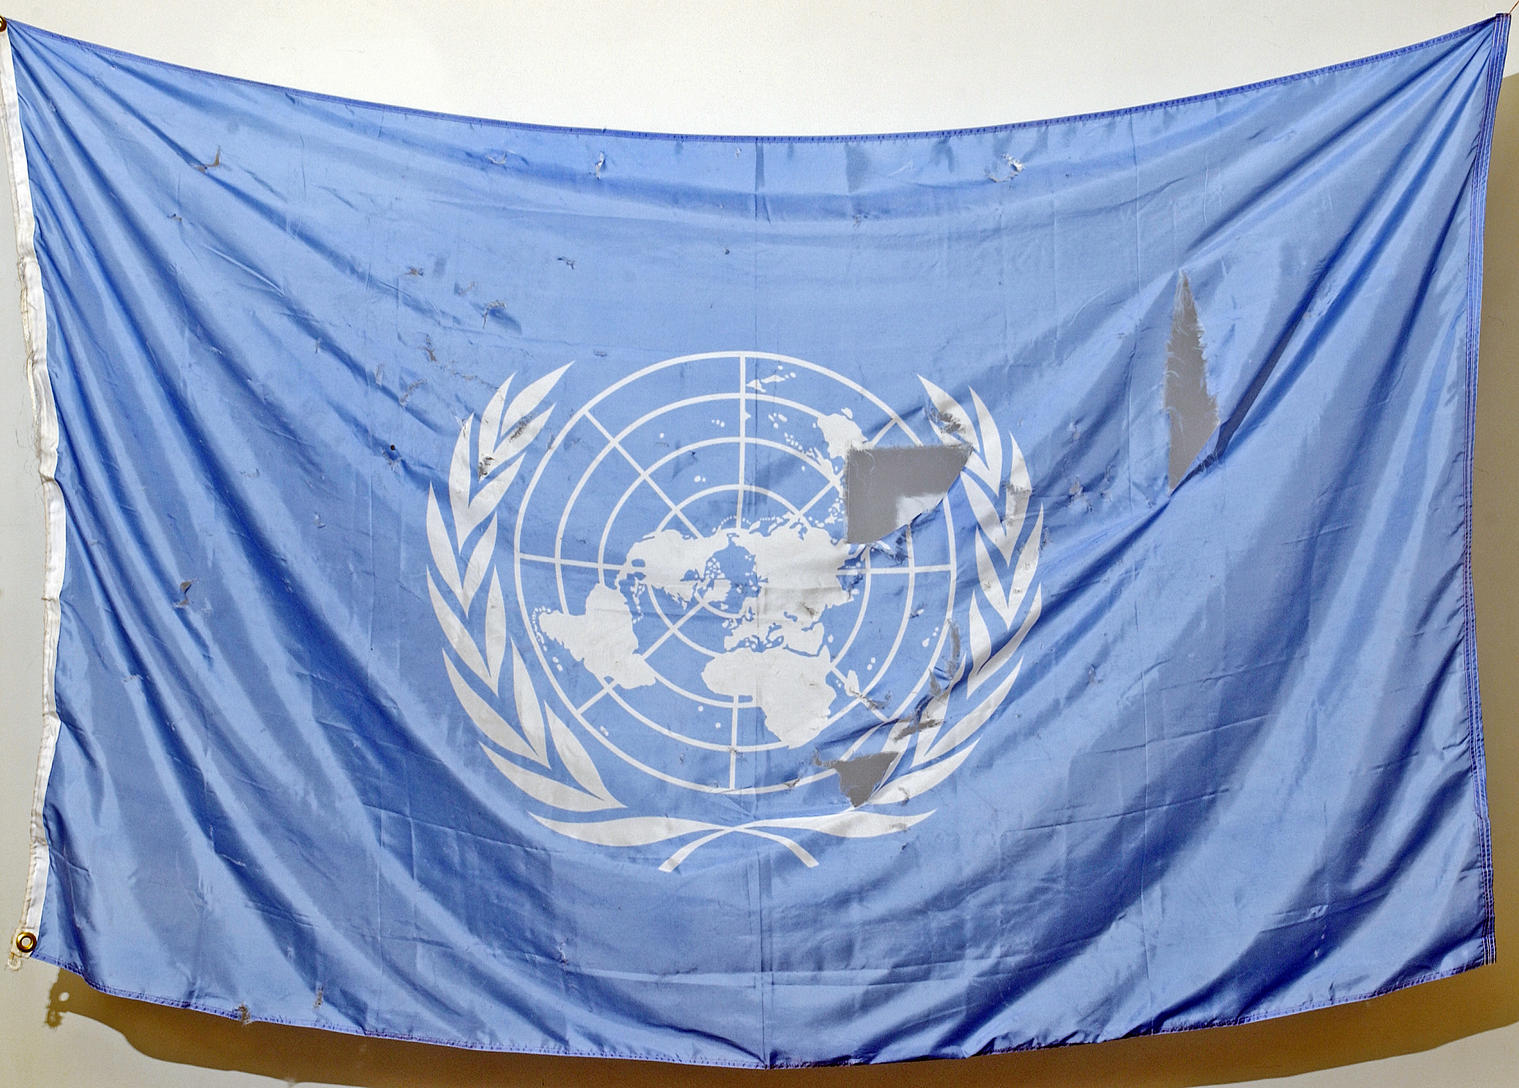 UN Flag Recovered From Debris of Bombed Baghdad UN Office